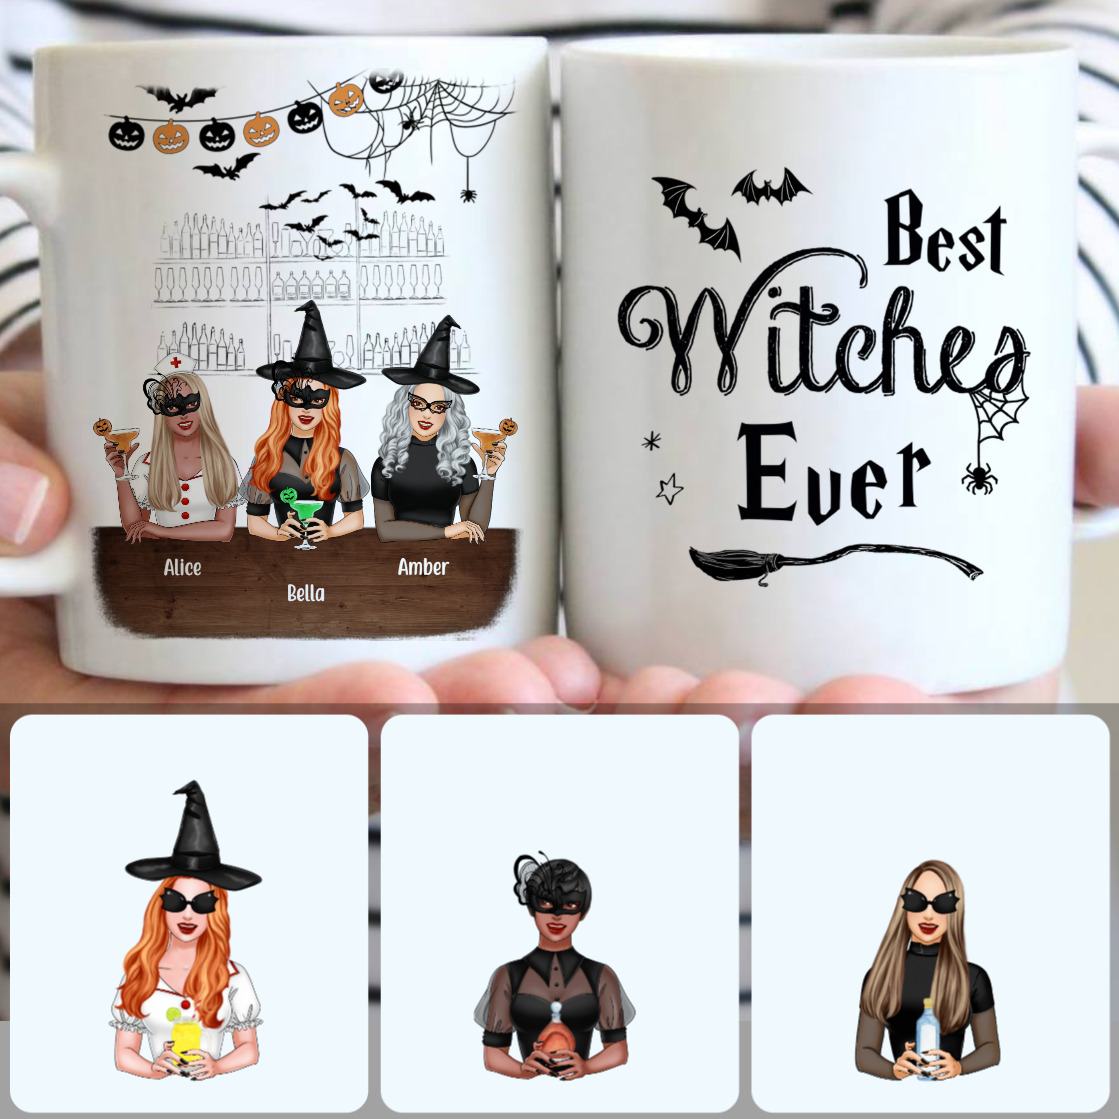 Personalized Mug, Special Halloween Gifts, 3 Sisters - Best Witches Ever Customized Coffee Mug With Names